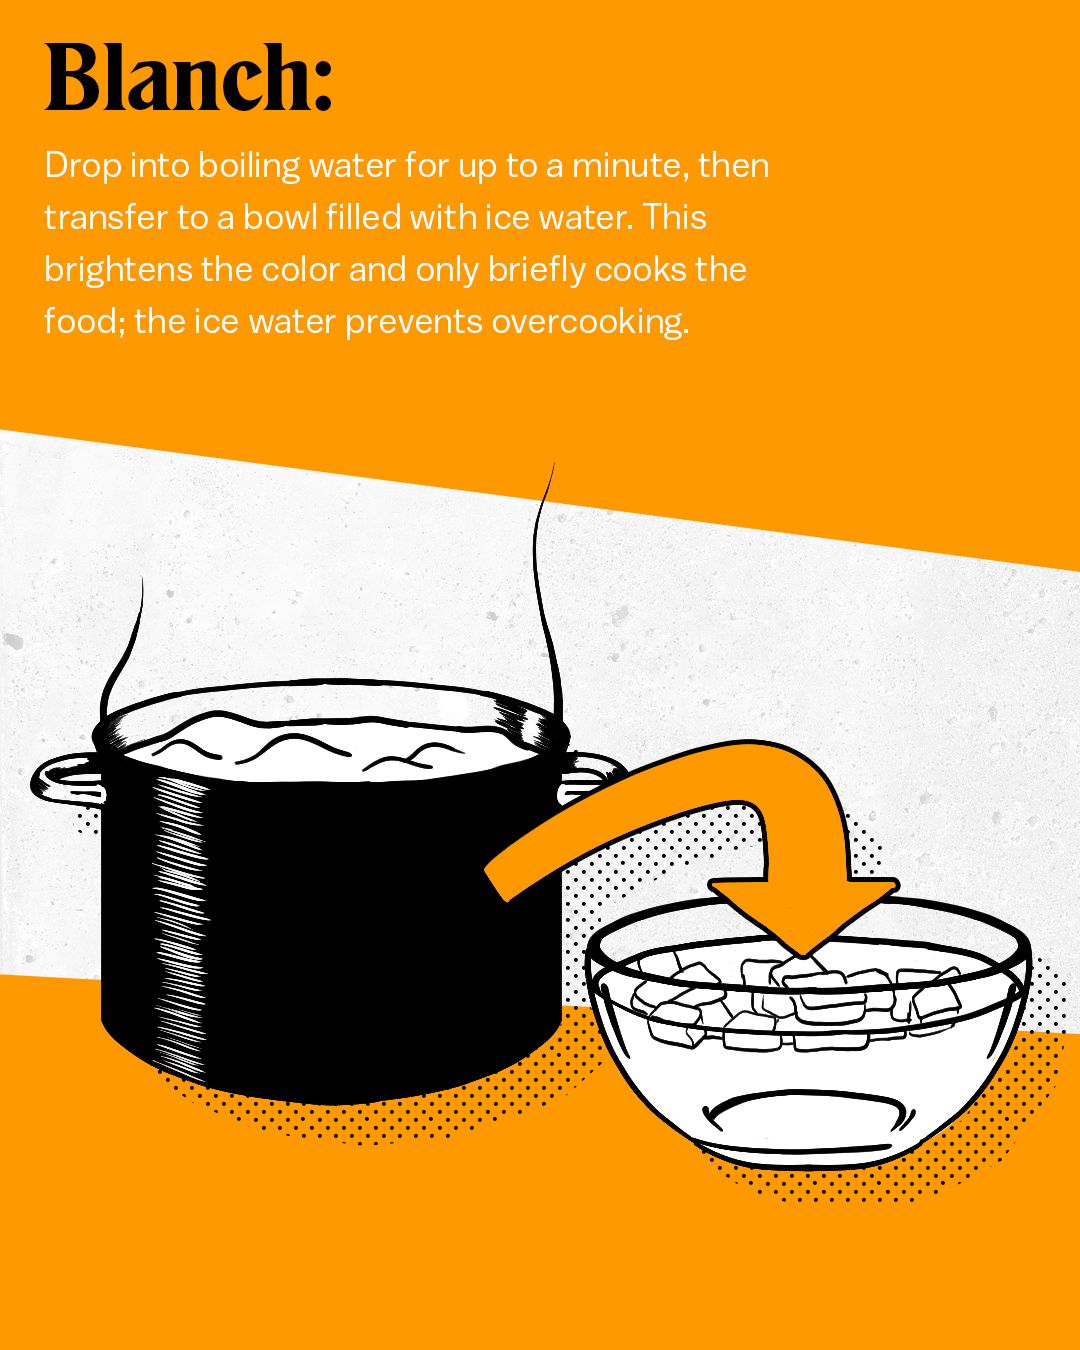 Blanch: Drop into boiling water for up to a minute, then transfer to a bowl filled with ice water. This brightens the color and only briefly cooks the food; the ice water prevents overcooking.